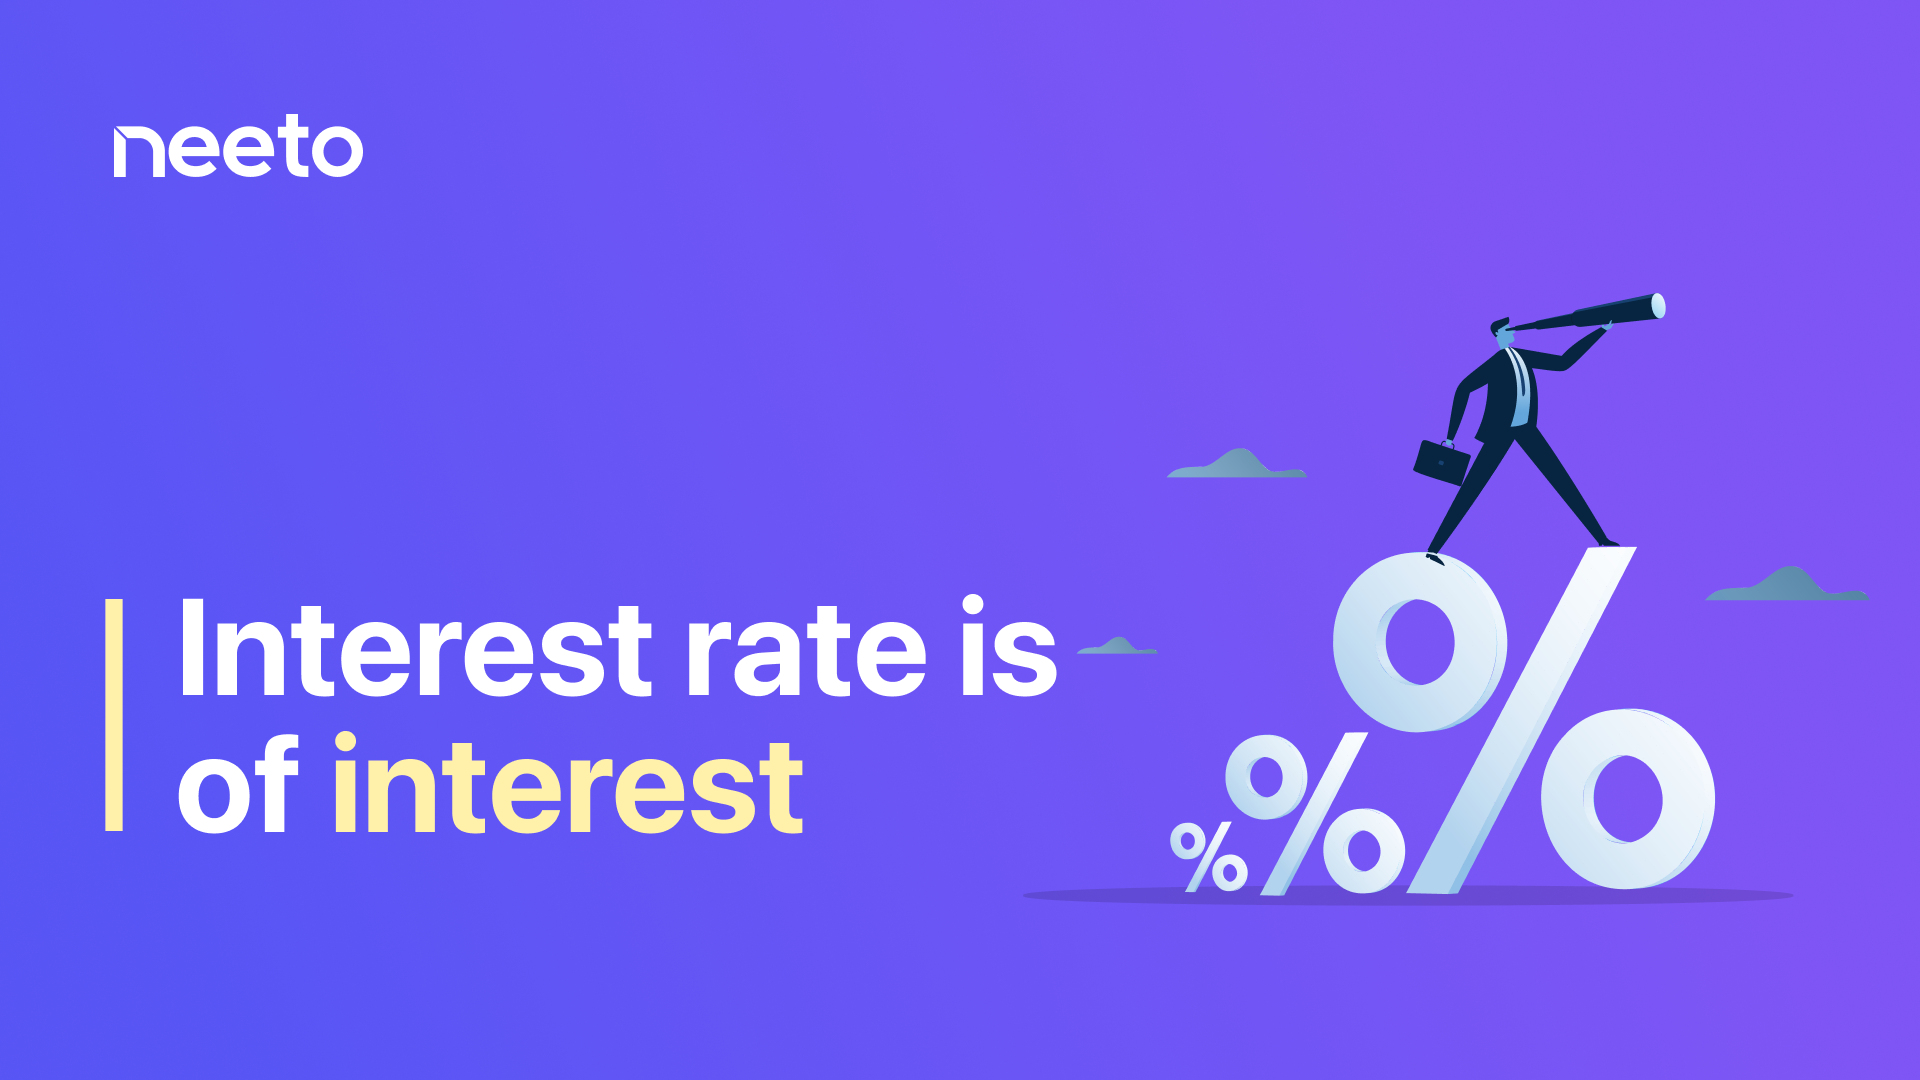 Interest rate is of interest